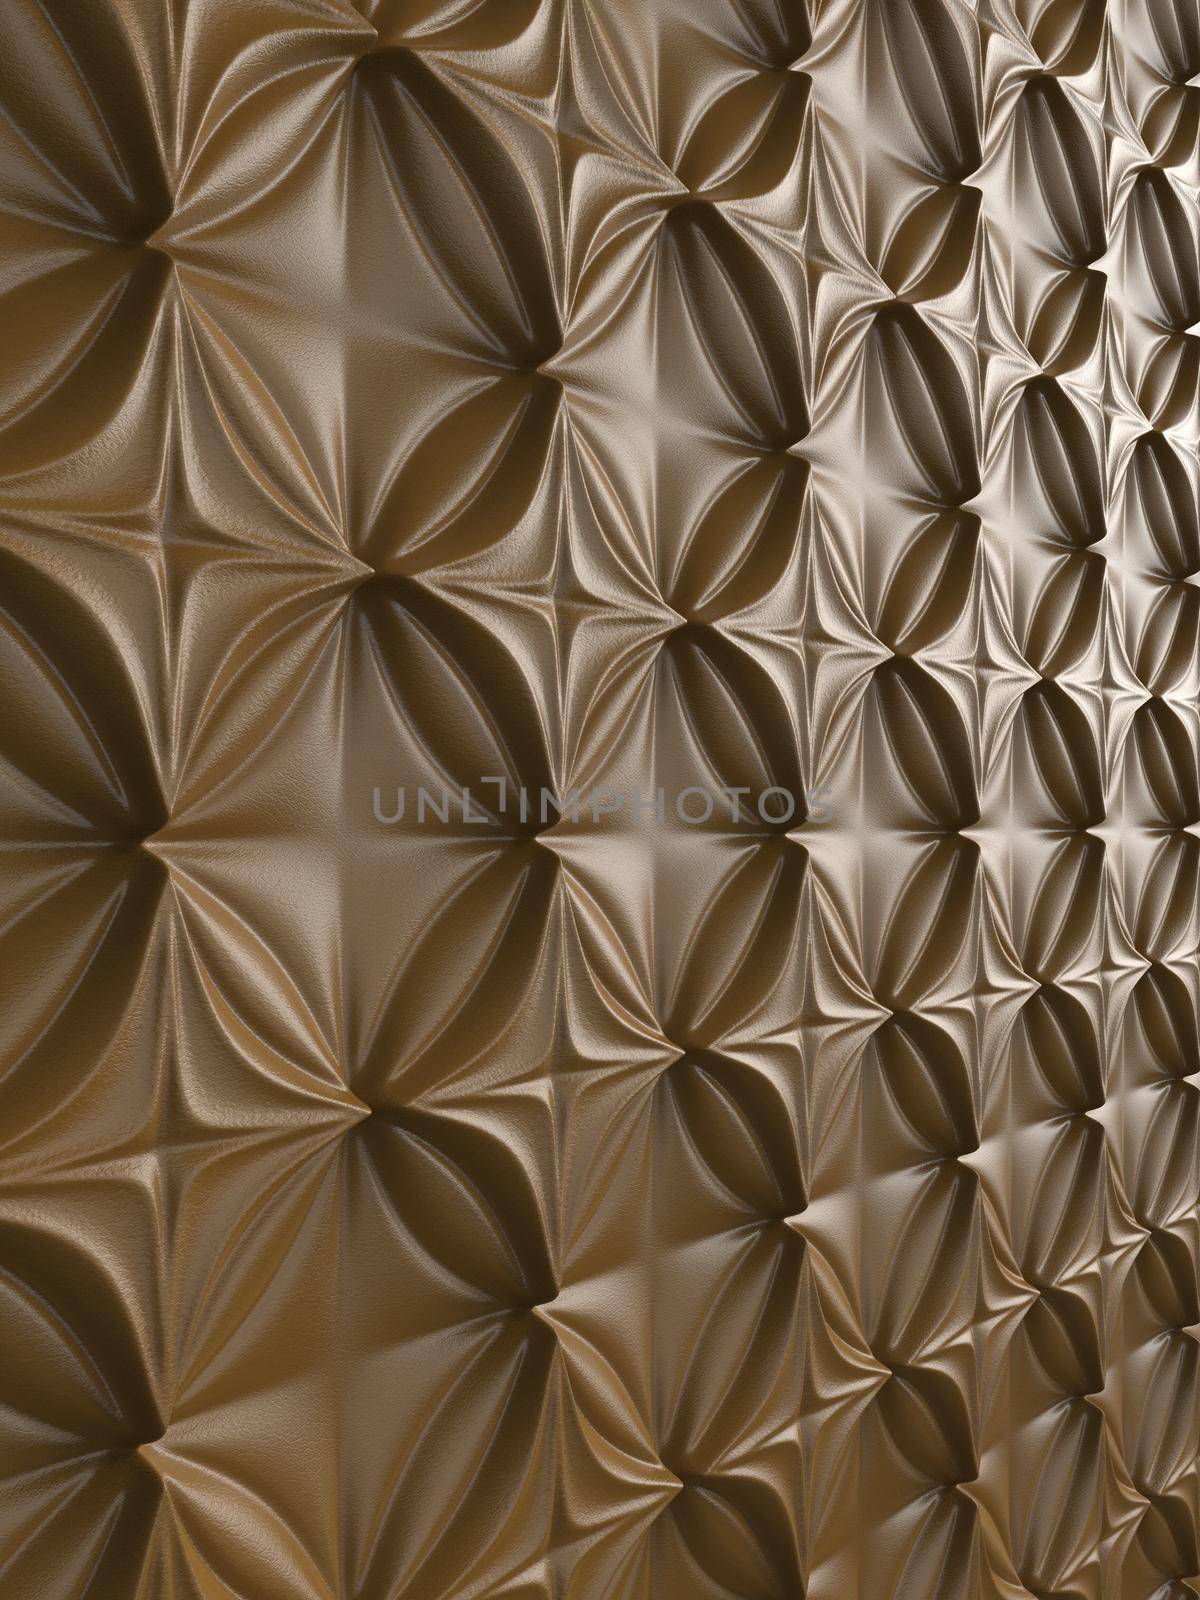 3D effect embossed perspective rendered background pattern. by gallofoto